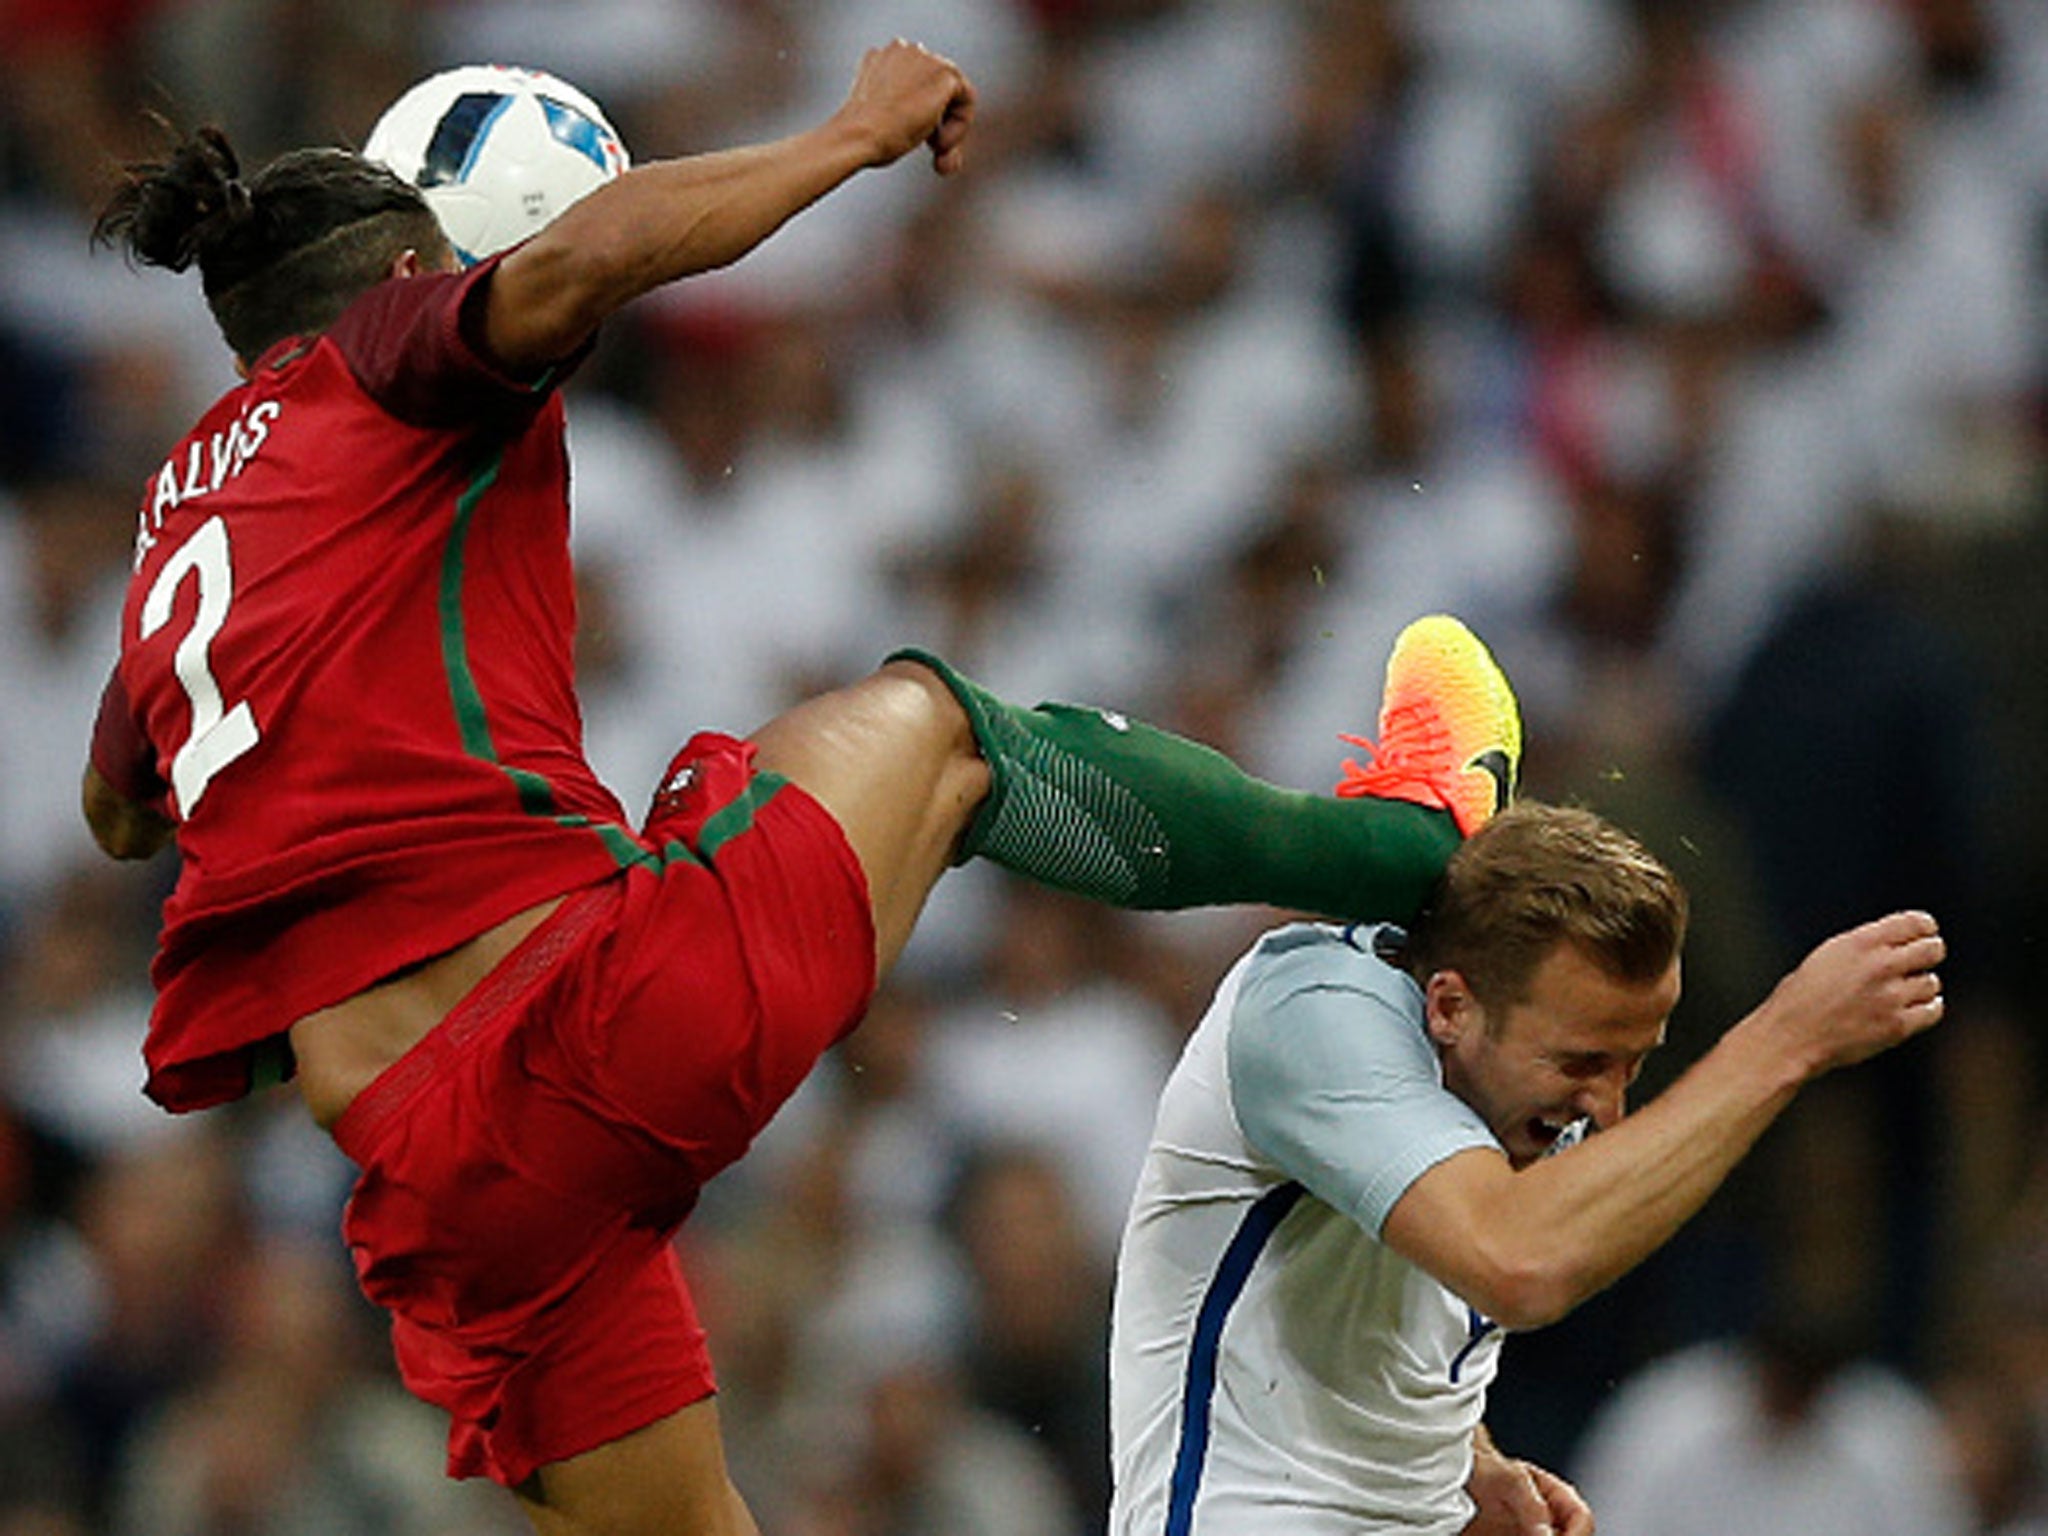 Harry Kane was criticised in some quarters for not making more of a dangerous challenge from Bruno Alves during last week's win over Portugal (Getty)